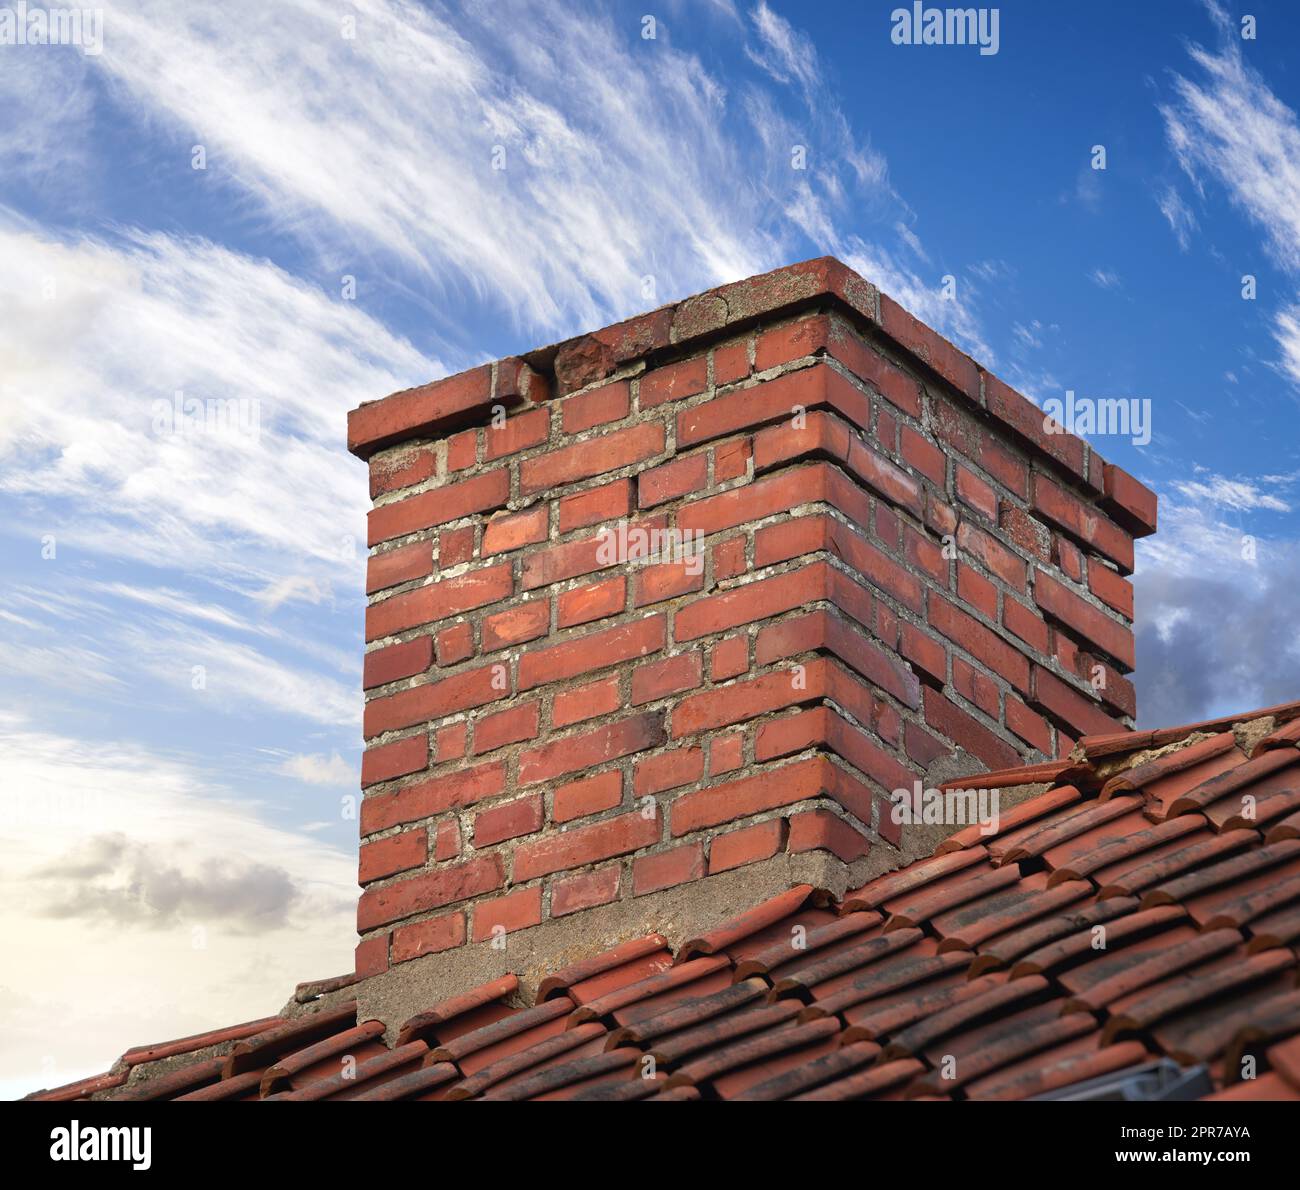 Closeup of red brick chimney chute against blue sky with clouds for combustion gas or home insulation on tiled roof. Architecture design on house building for smoke extraction from fireplace furnace Stock Photo